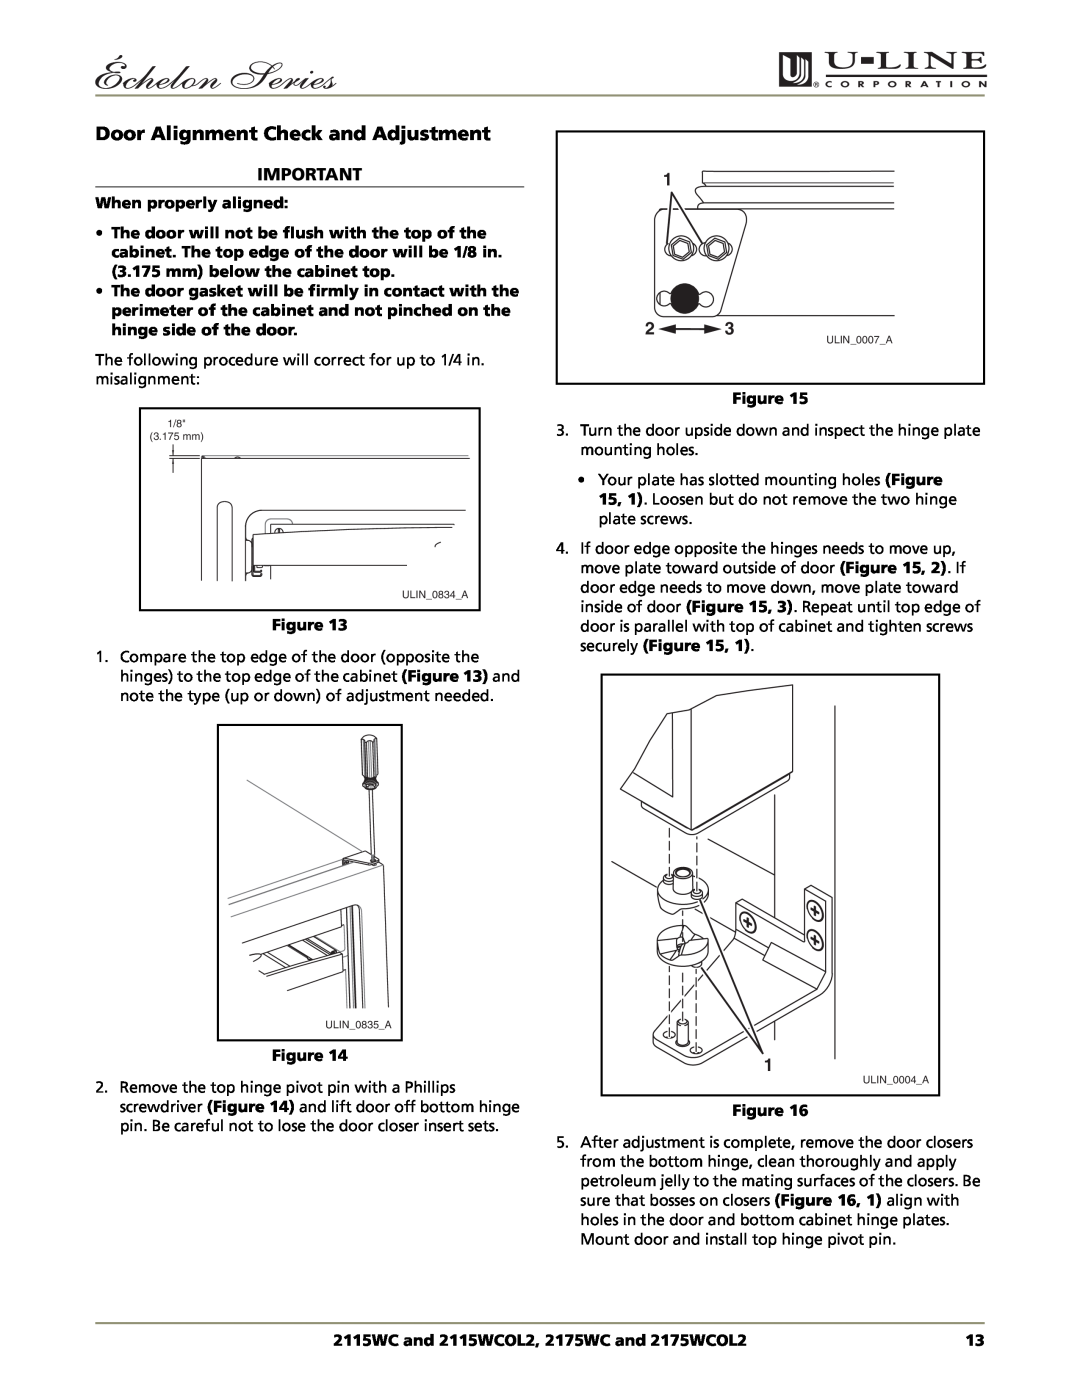 U-Line manual Door Alignment Check and Adjustment, When properly aligned, 2115WC and 2115WCOL2, 2175WC and 2175WCOL2 